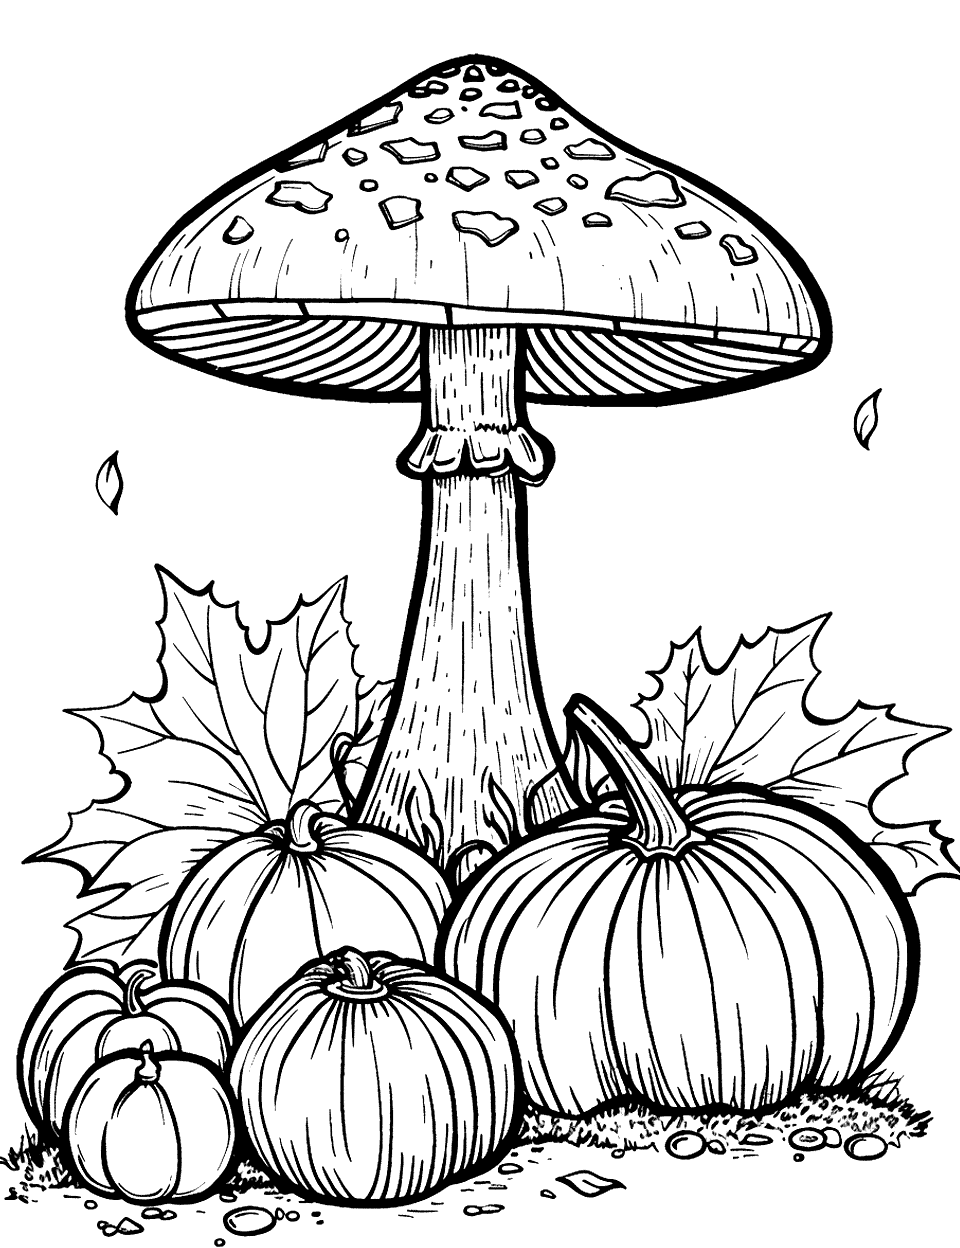 Huge Mushroom and Harvest Vegetables Coloring Page - A scene with a huge mushroom amid pumpkins on the ground.